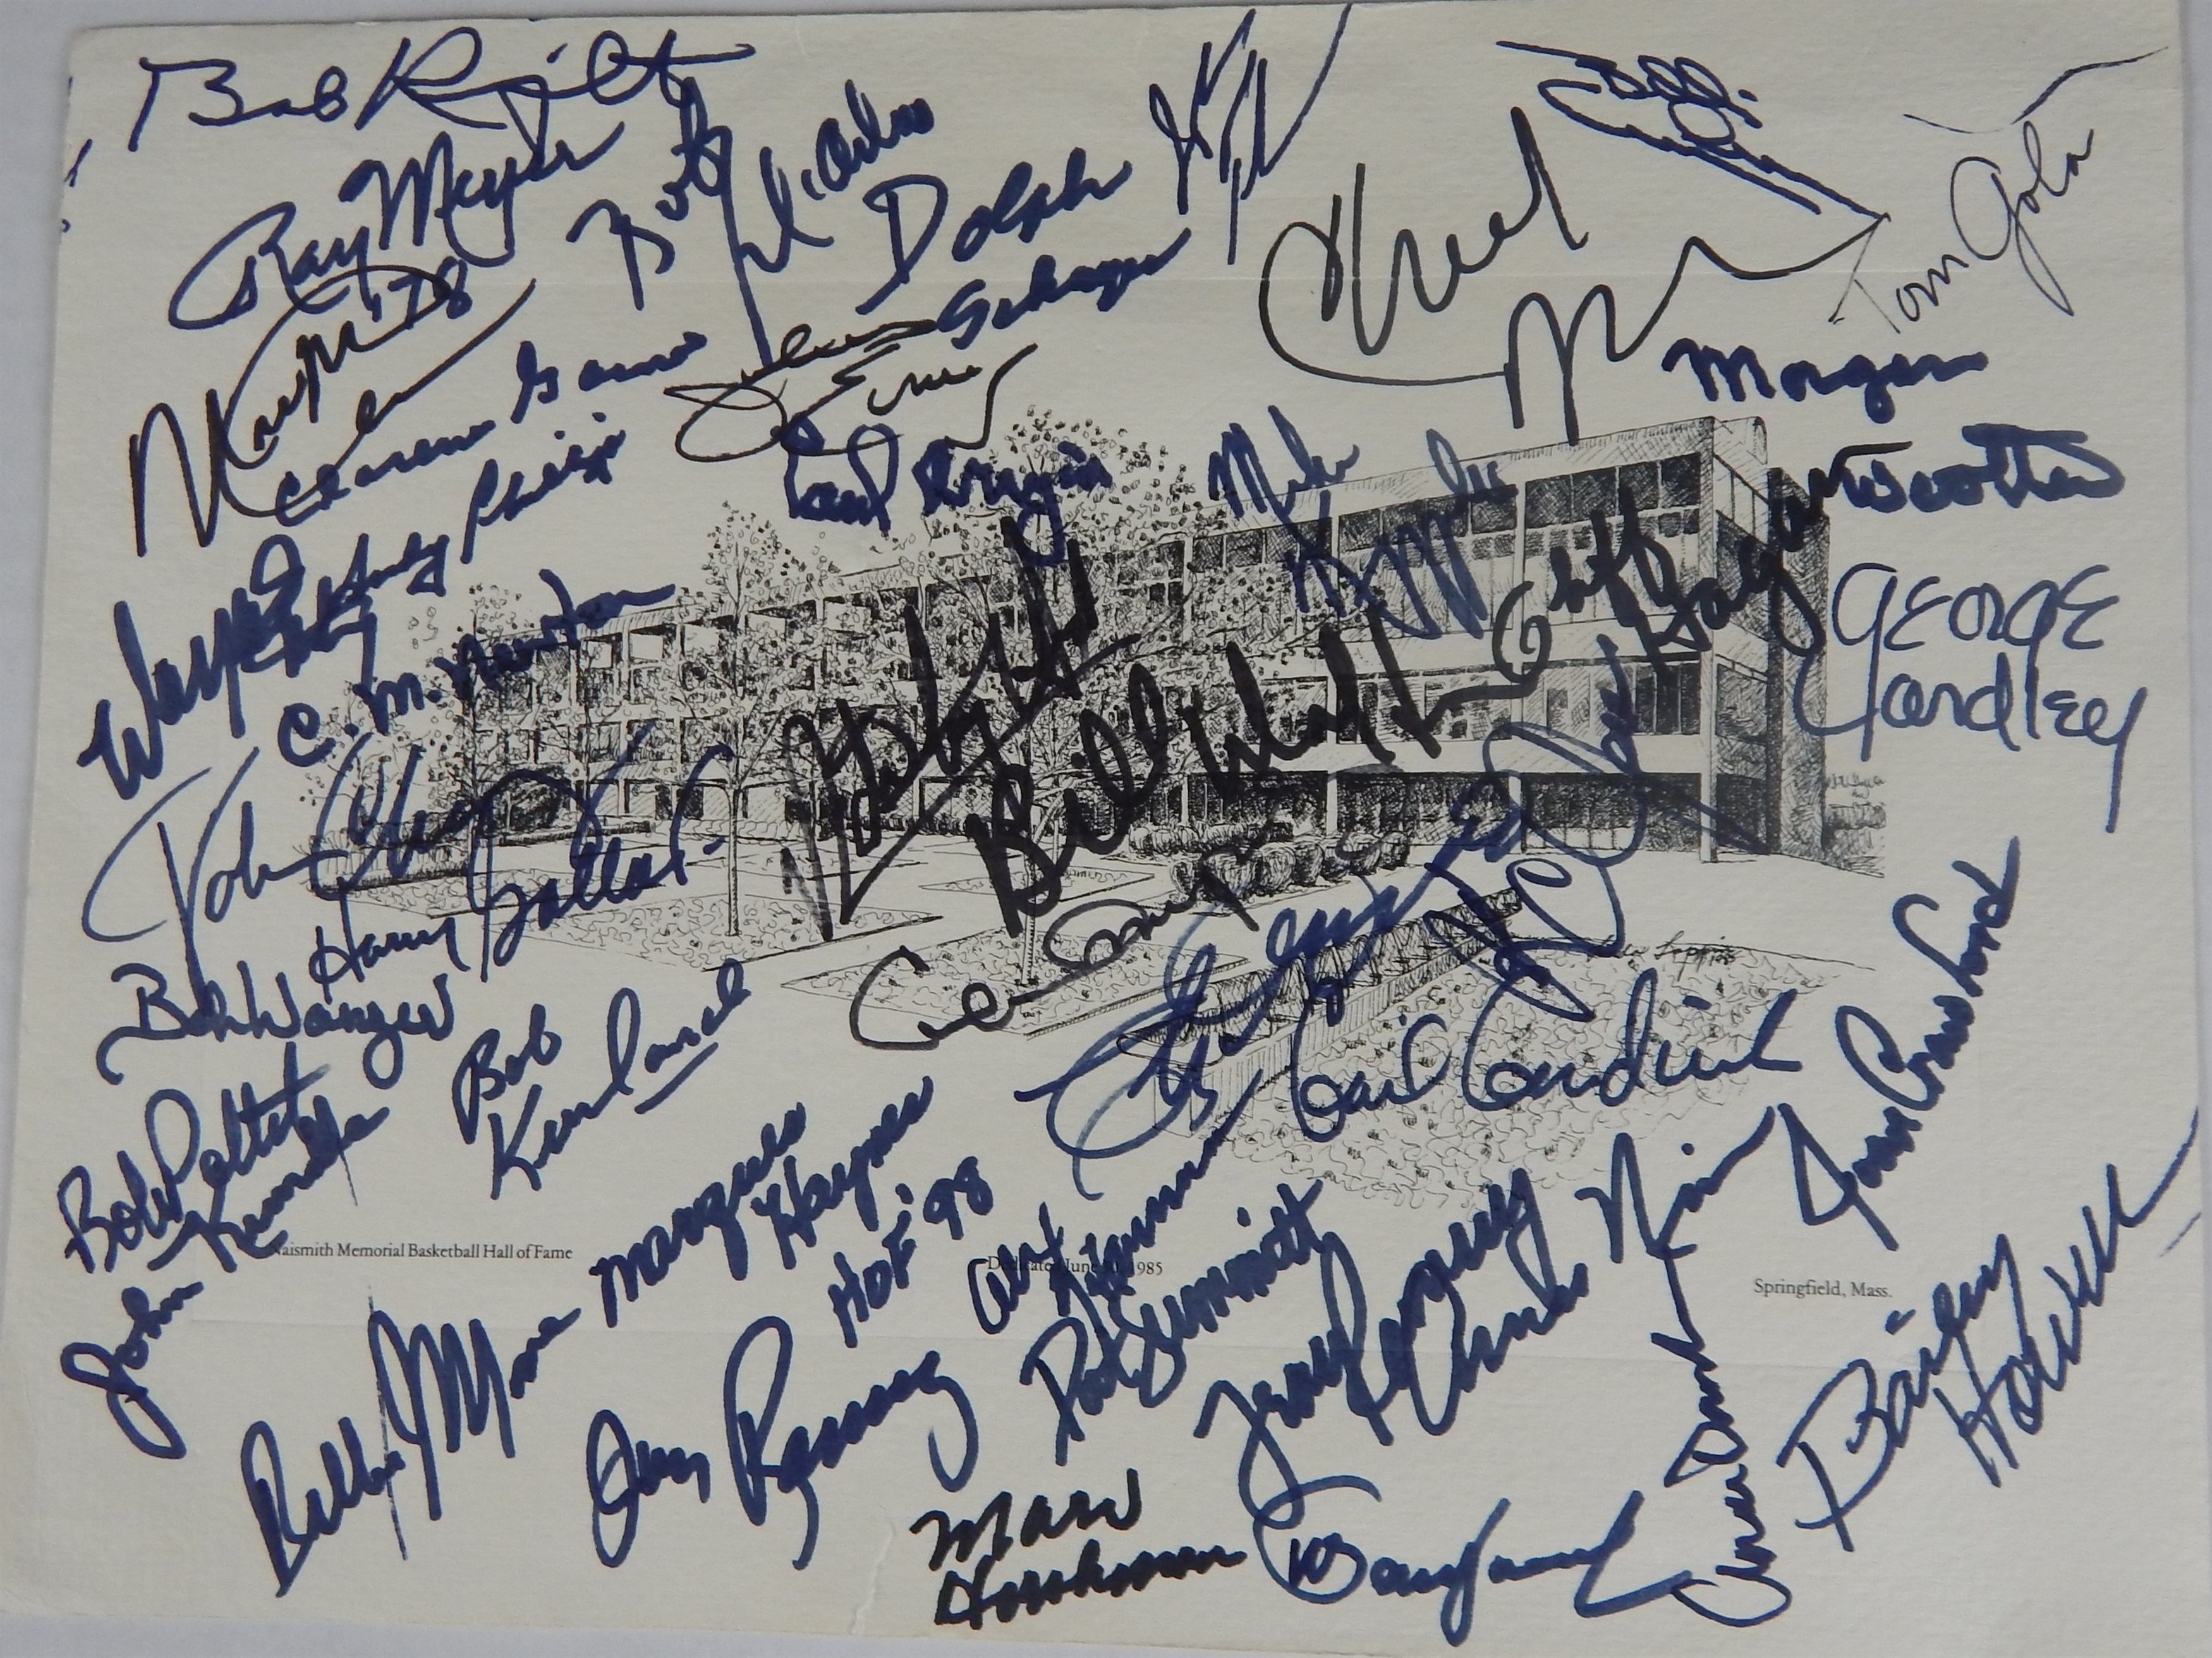 Autographs - Naismith Basketball HOF Induction IN PERSON Signed Sheet (38 signatures)